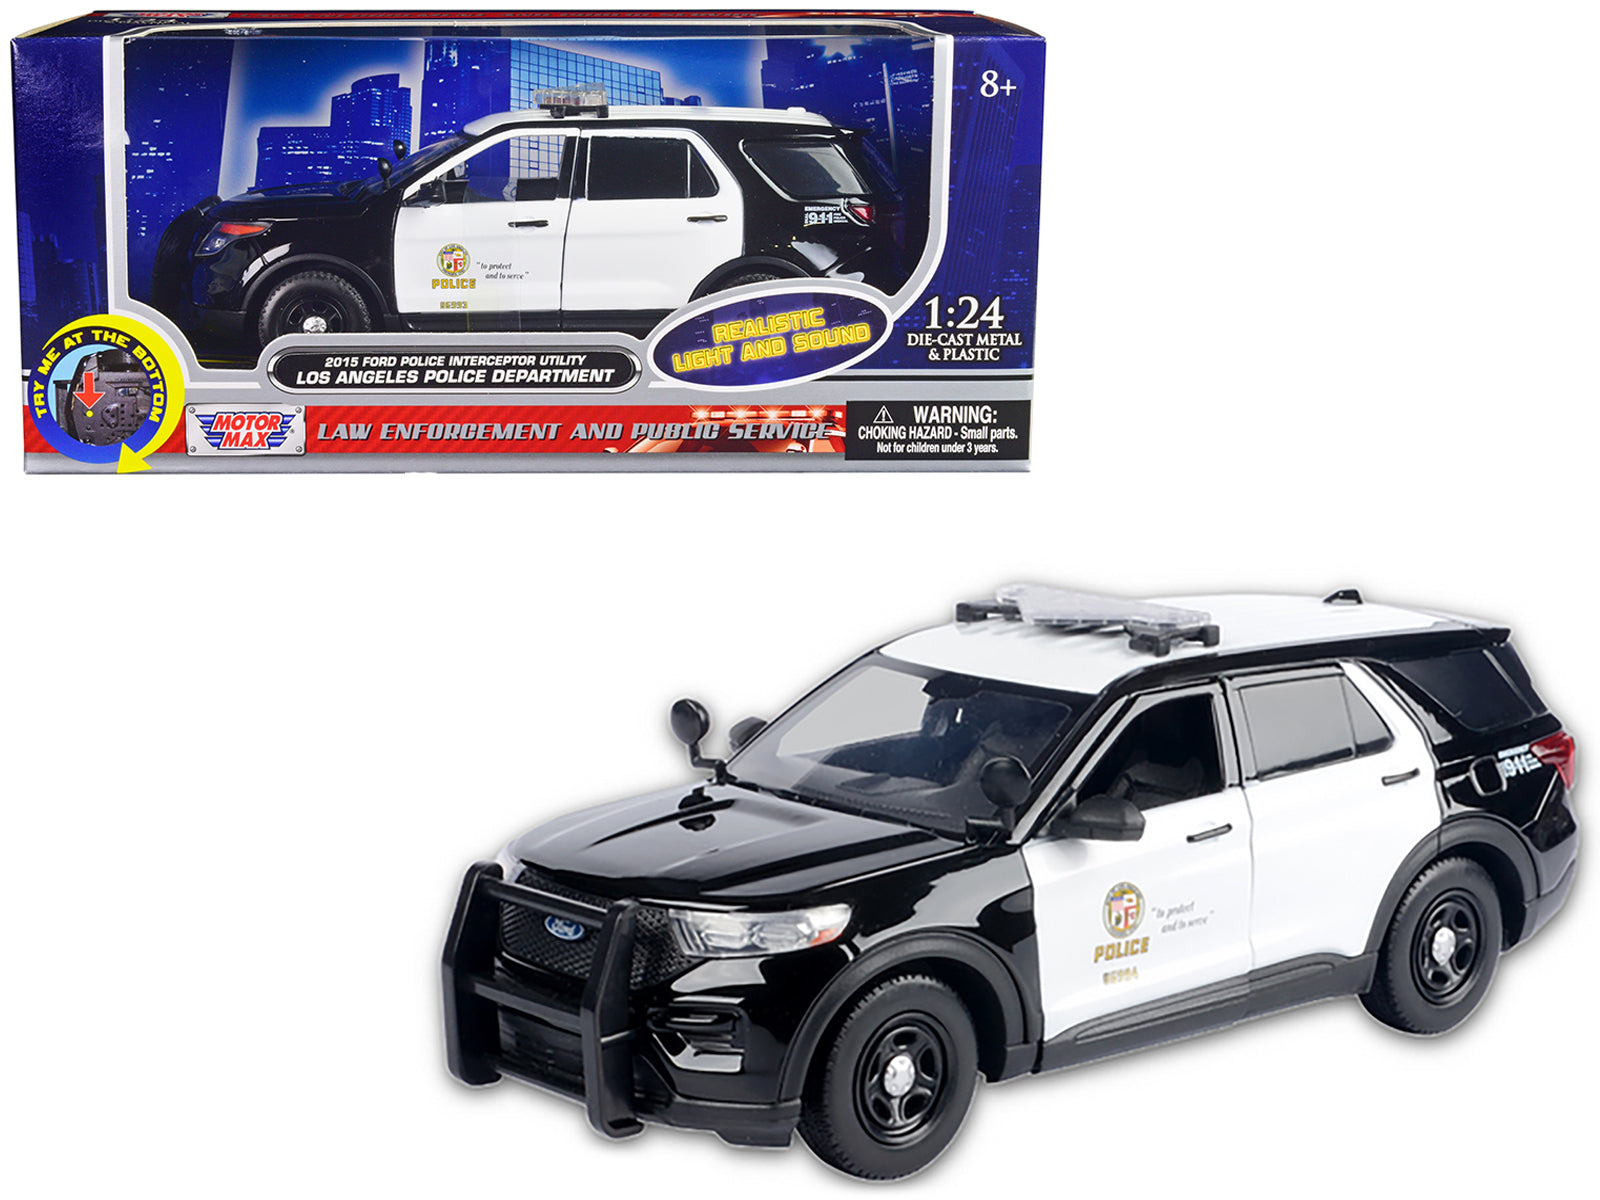 2015 Ford Police Interceptor Utility Black and White "Los Angeles Police Department (LAPD)" with Flashing Light Bar and Front and Rear Lights and Sounds 1/24 Diecast Model Car by Motormax